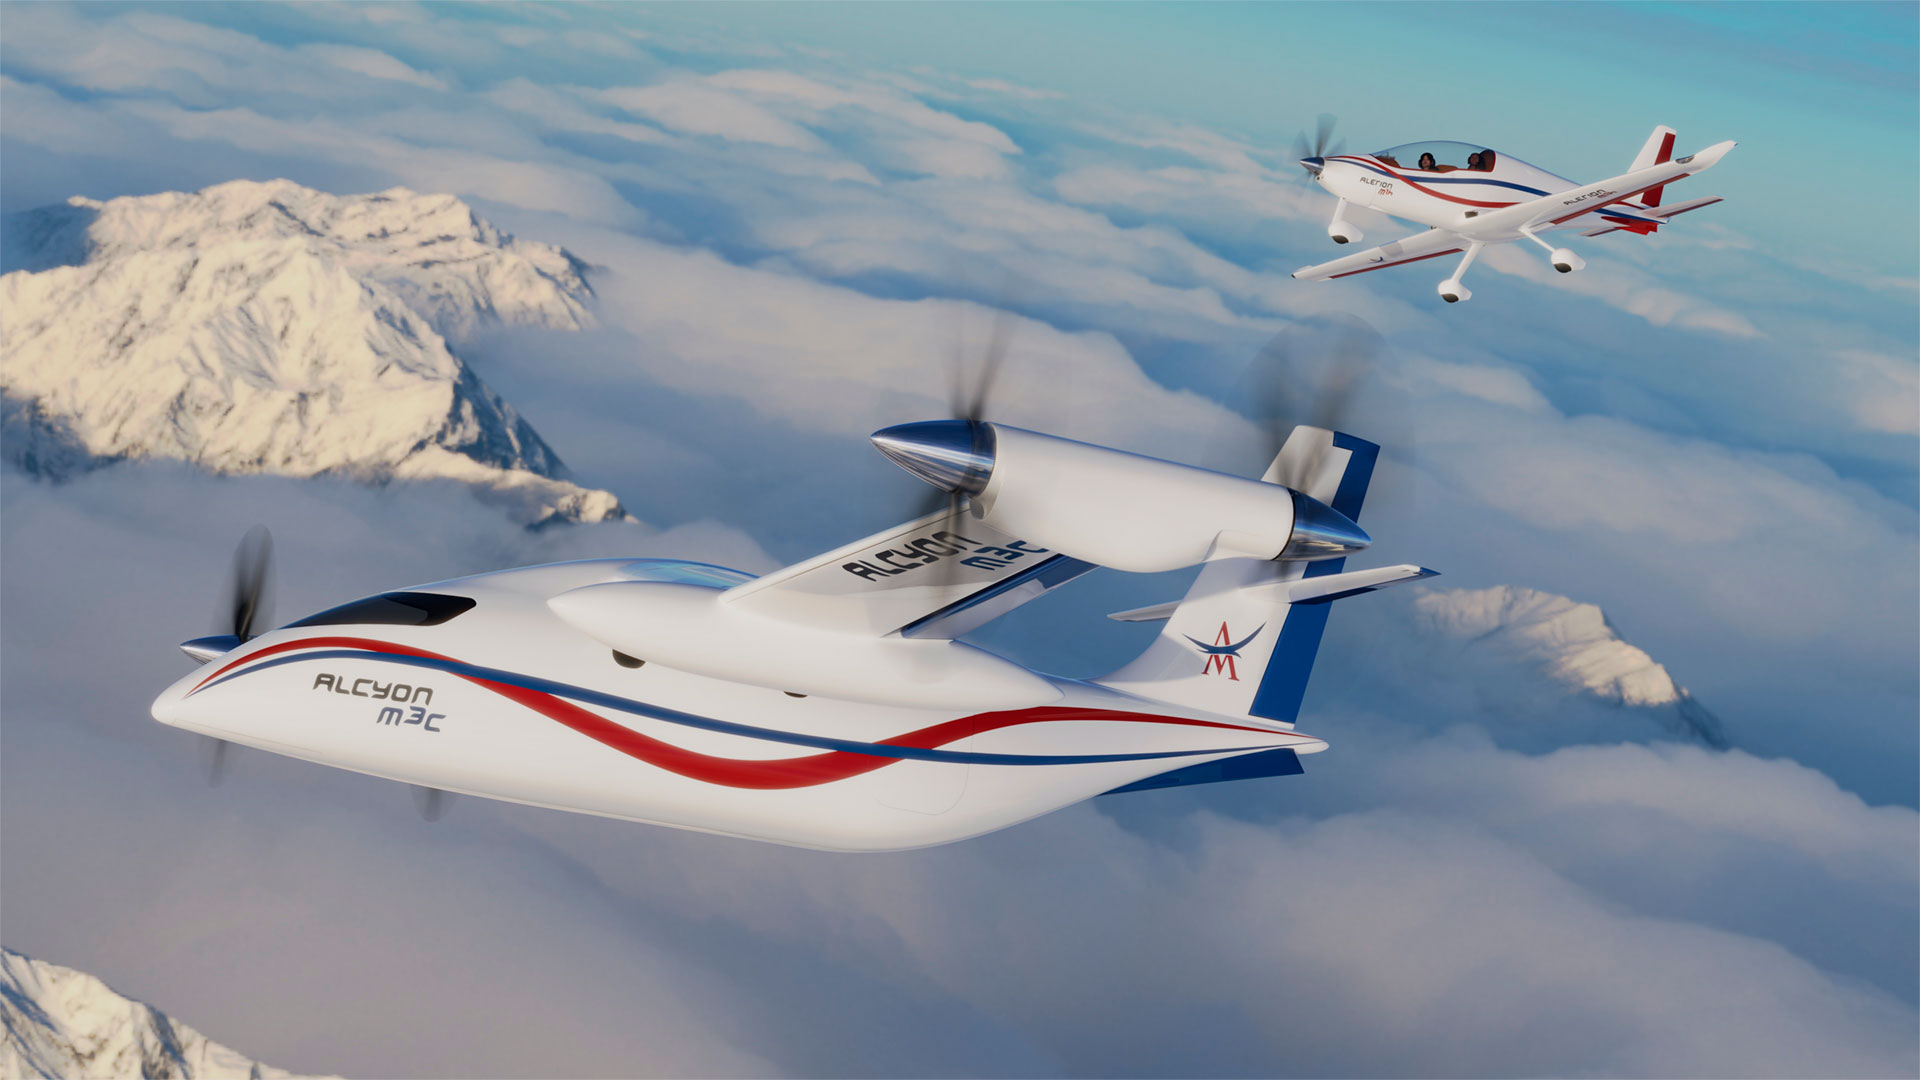 Concept Hybrid and hydrogen-powered aircraft, with short take-off and landing meeting the requirements of modern mobility